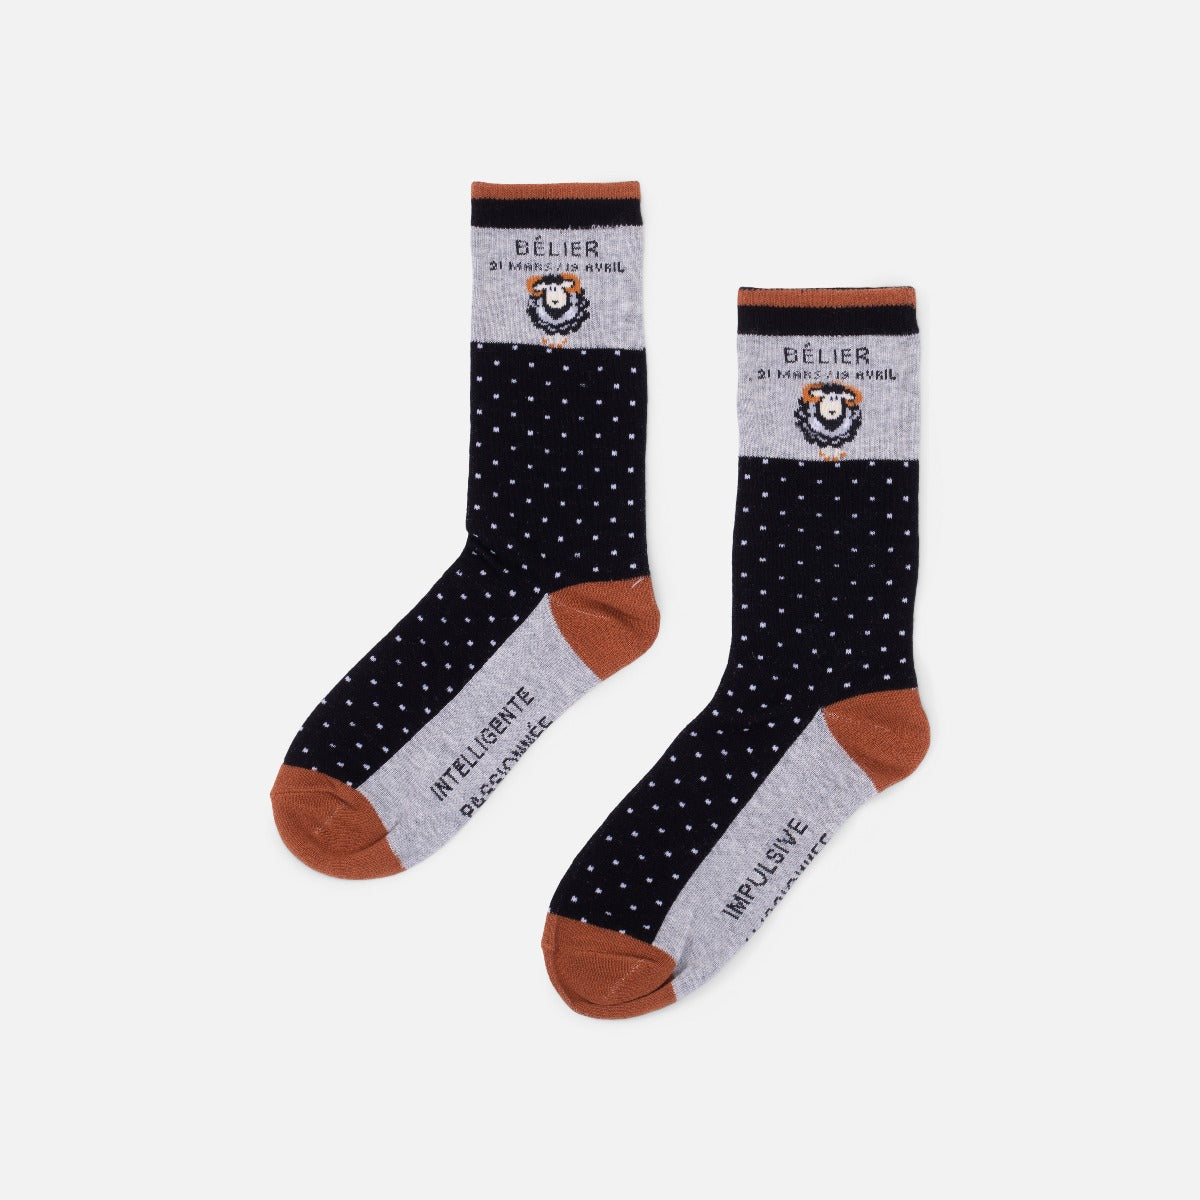 Grey and black socks astrological sign "aries"